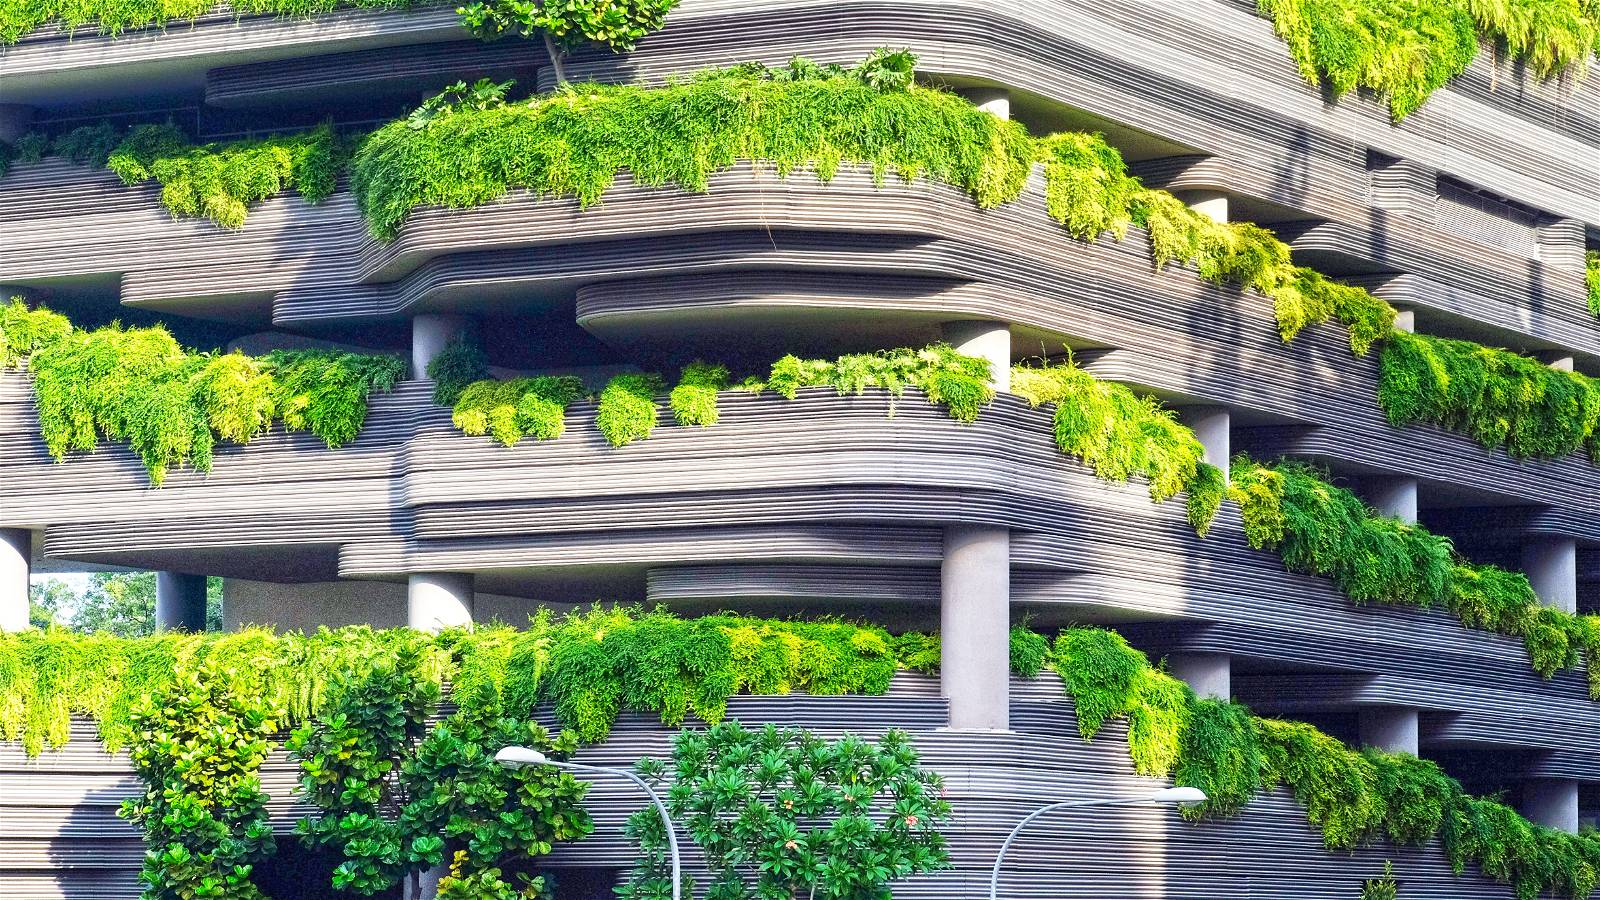 Nature-based solutions: City greening reduces carbon emissions